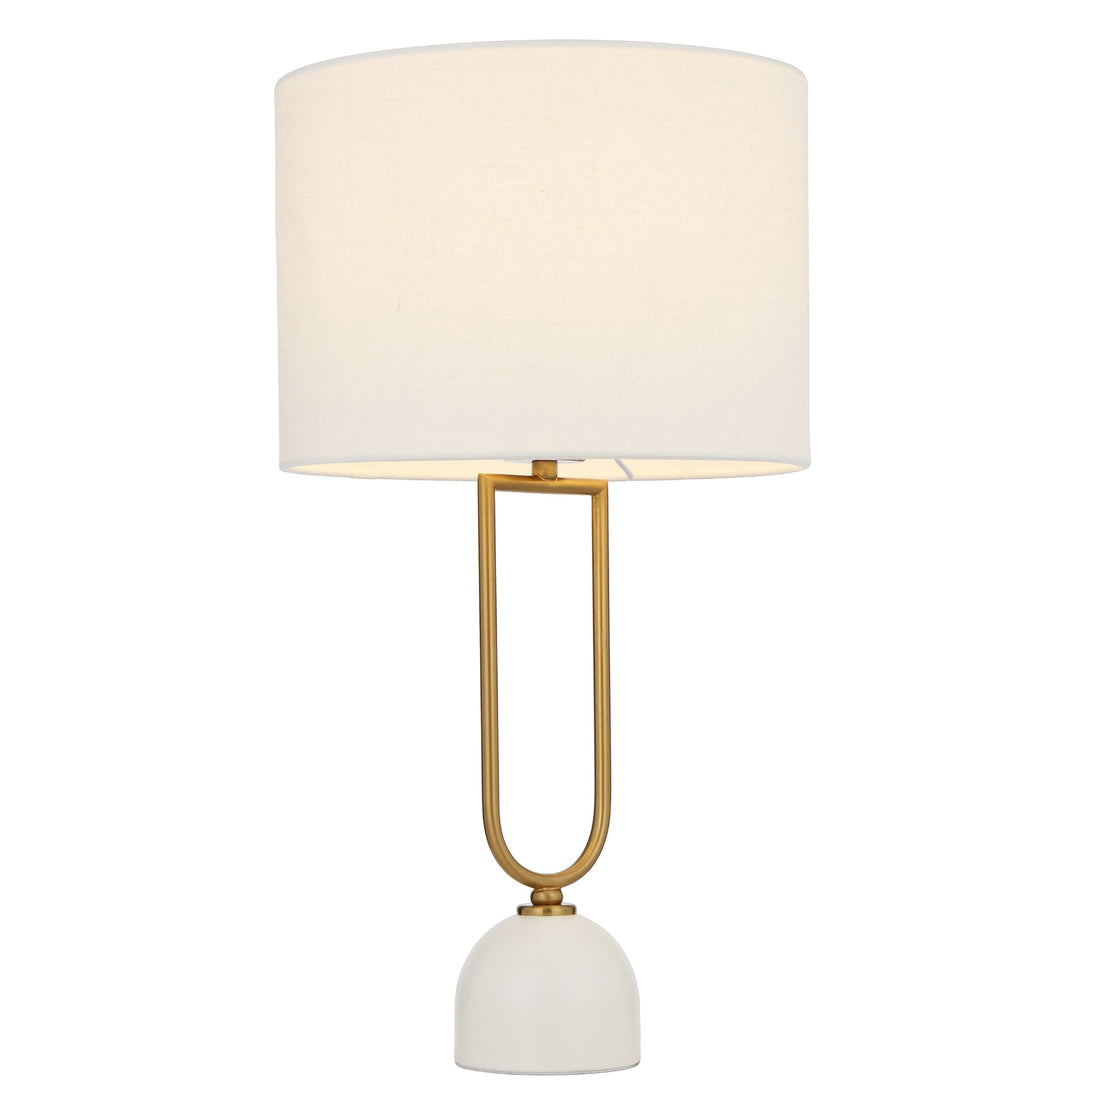 Erden White and Antique Gold Art Deco Modern Table Lamp